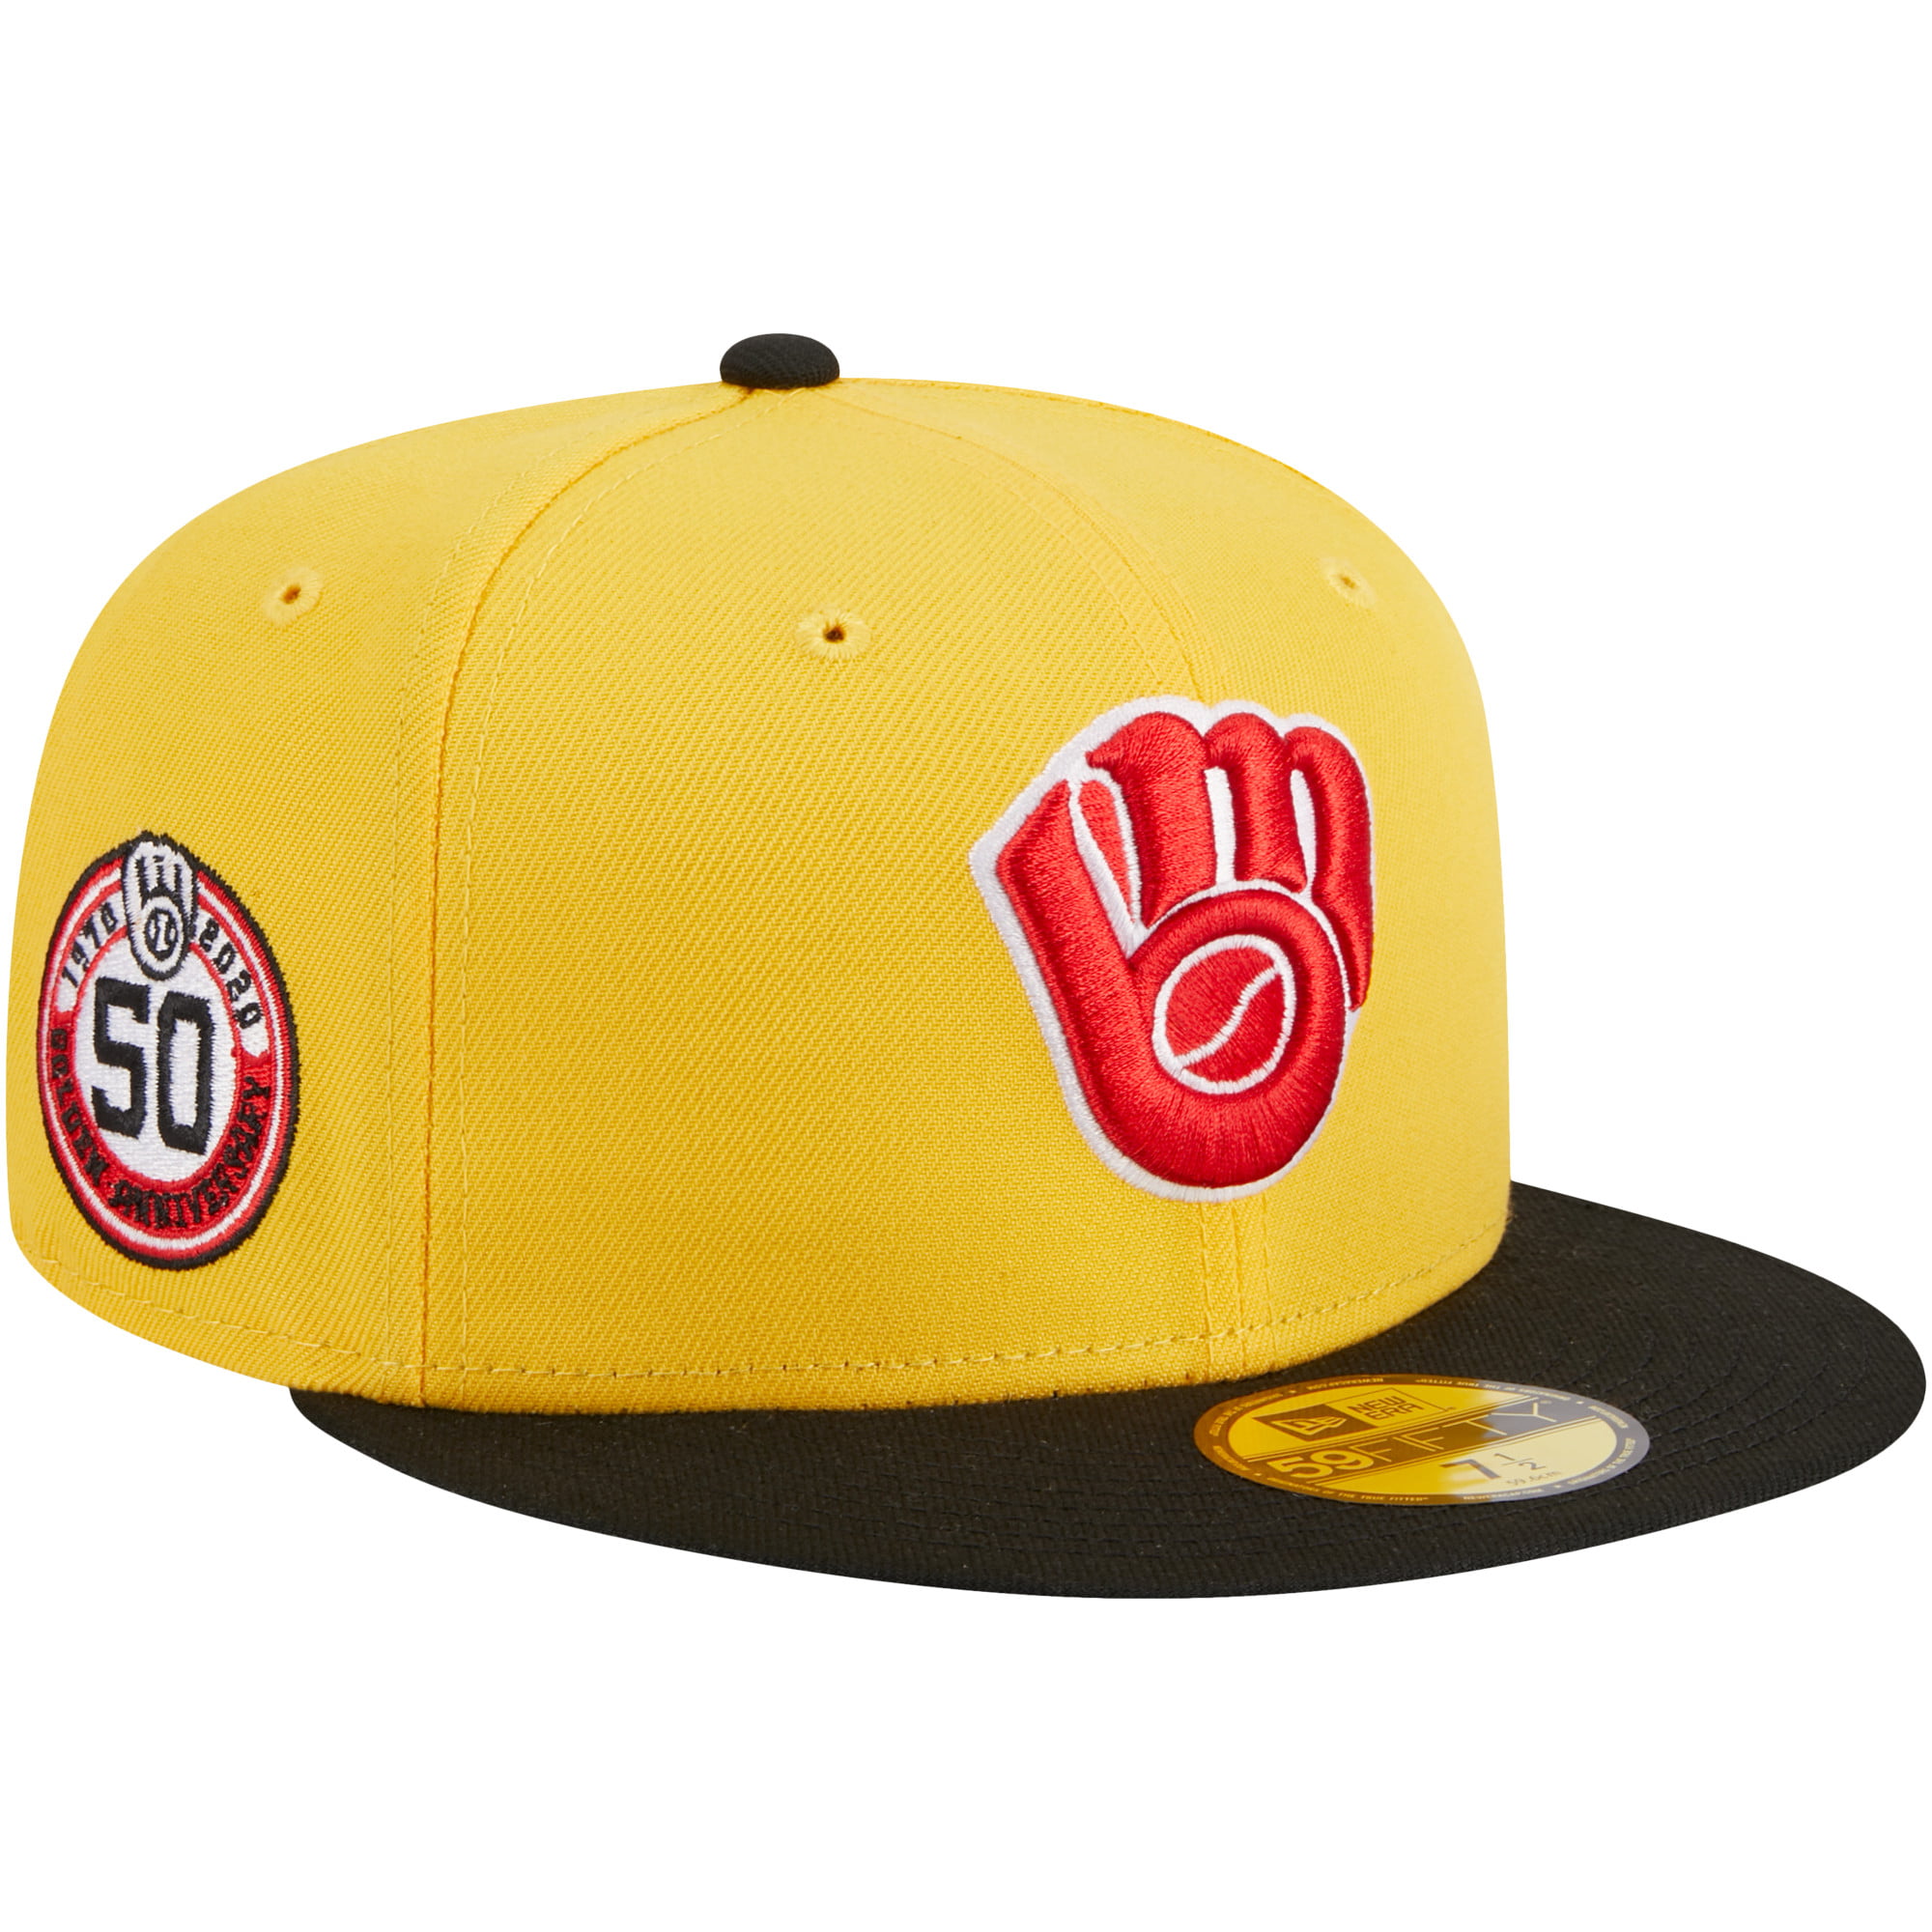 Men's New Era Yellow/Black Milwaukee Brewers Grilled 59FIFTY